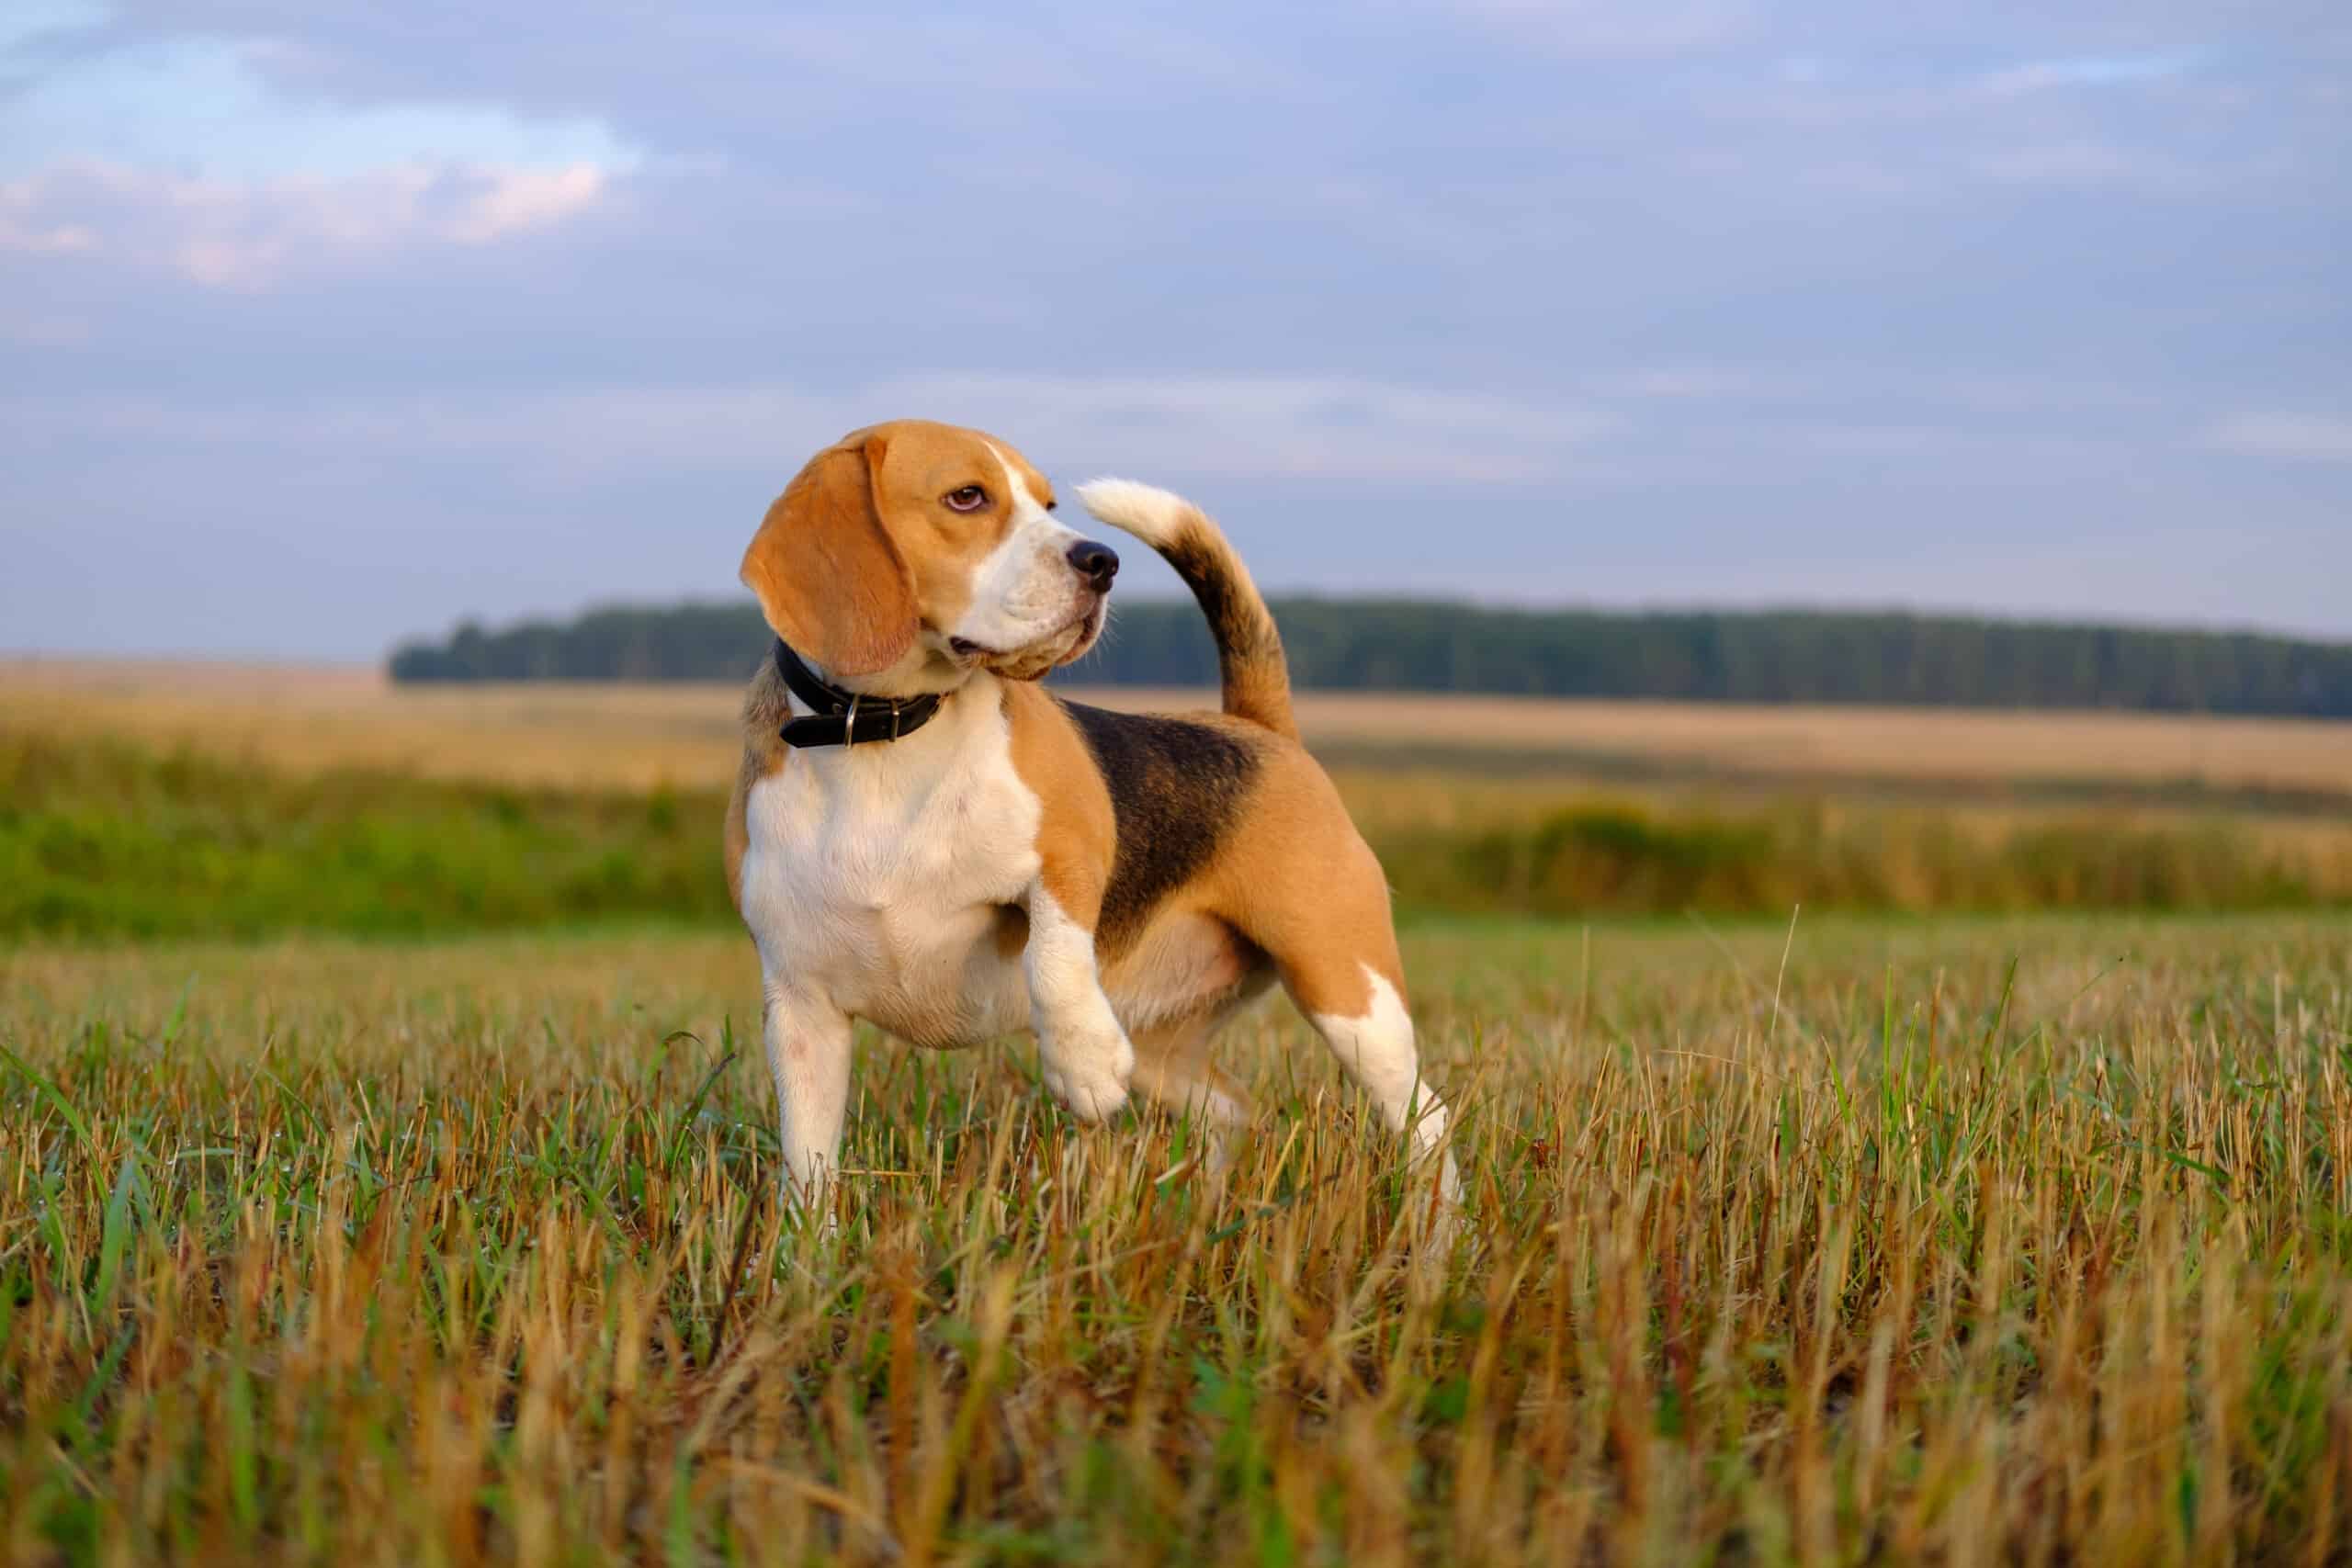 the beautiful Beagle is standing in the field